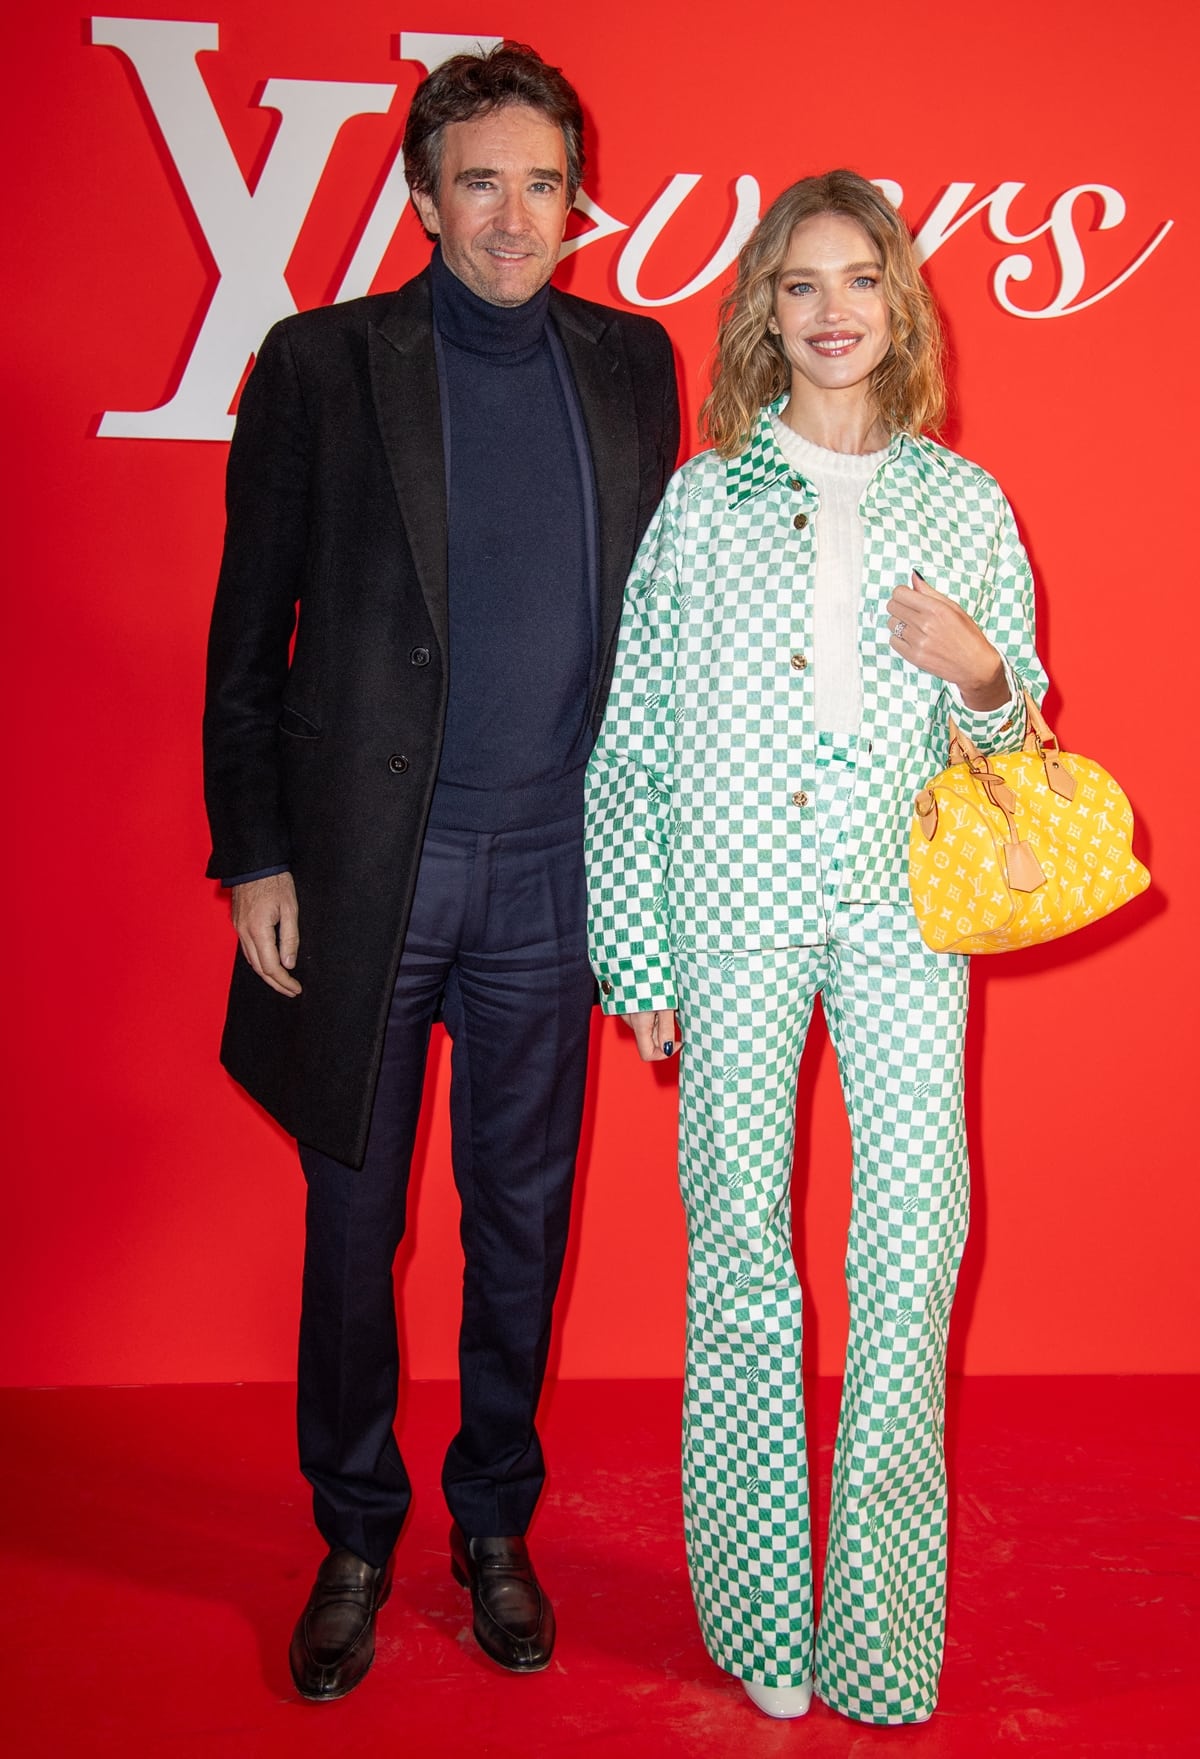 Natalia Vodianova radiated elegance at the Louis Vuitton event, posing with Antoine Arnault in a chic white and turquoise checkered ensemble, accented by a white high-neck sweater and a vibrant yellow handbag